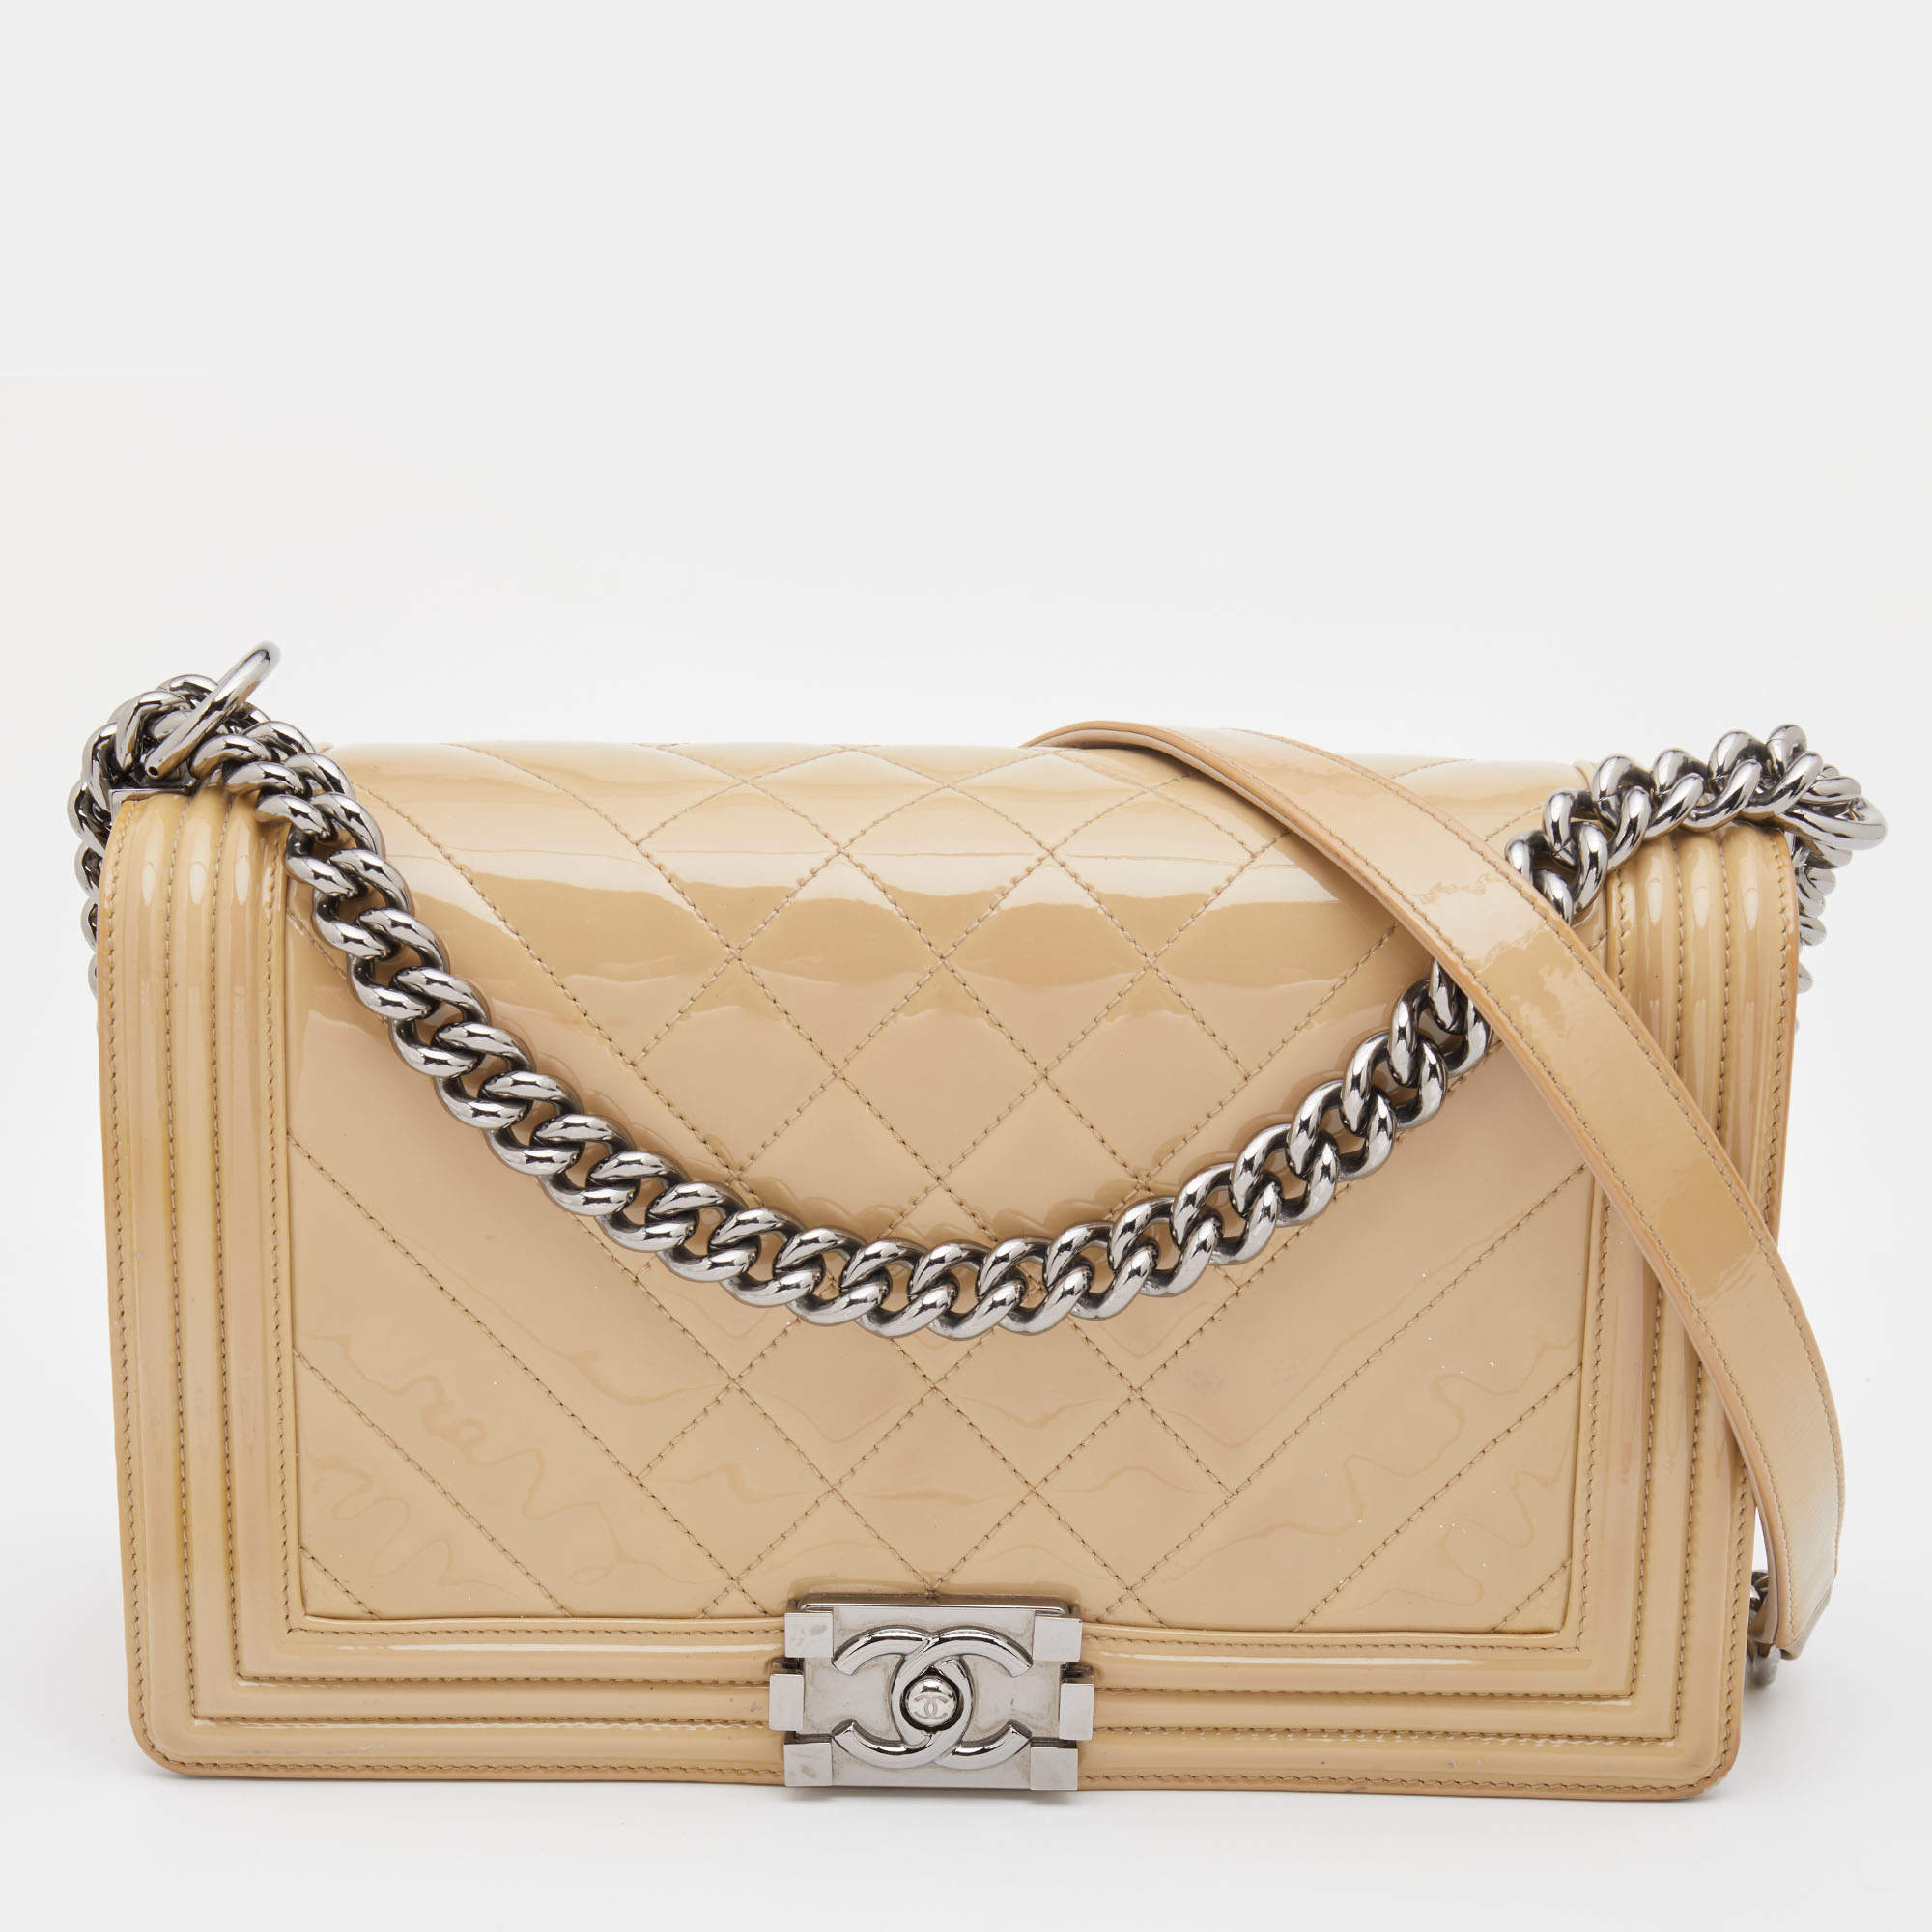 Chanel Beige Quilted Patent Leather New Medium Boy Bag